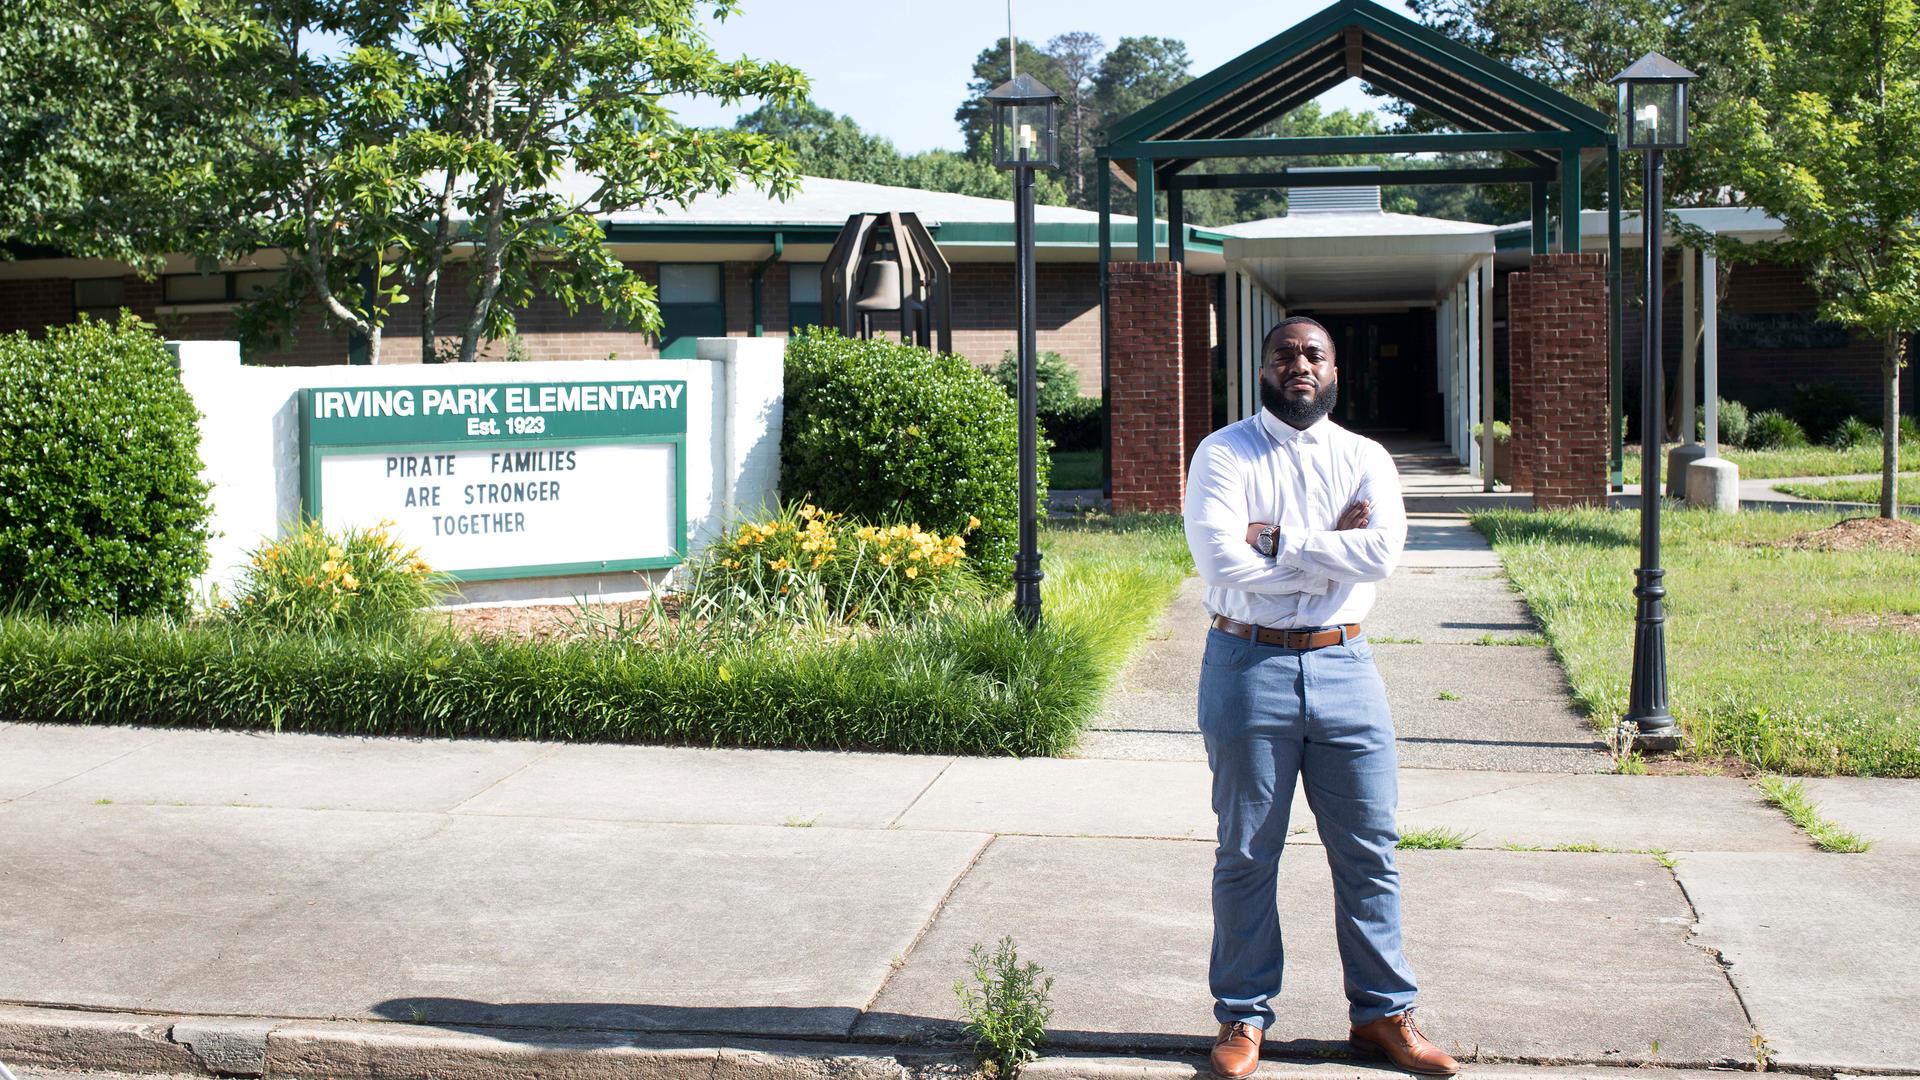 Brayan Guevara in front of Irving Park Elementary School, in Greensboro, North Carolina, where he is a teacher's assistant, June 3, 2020.